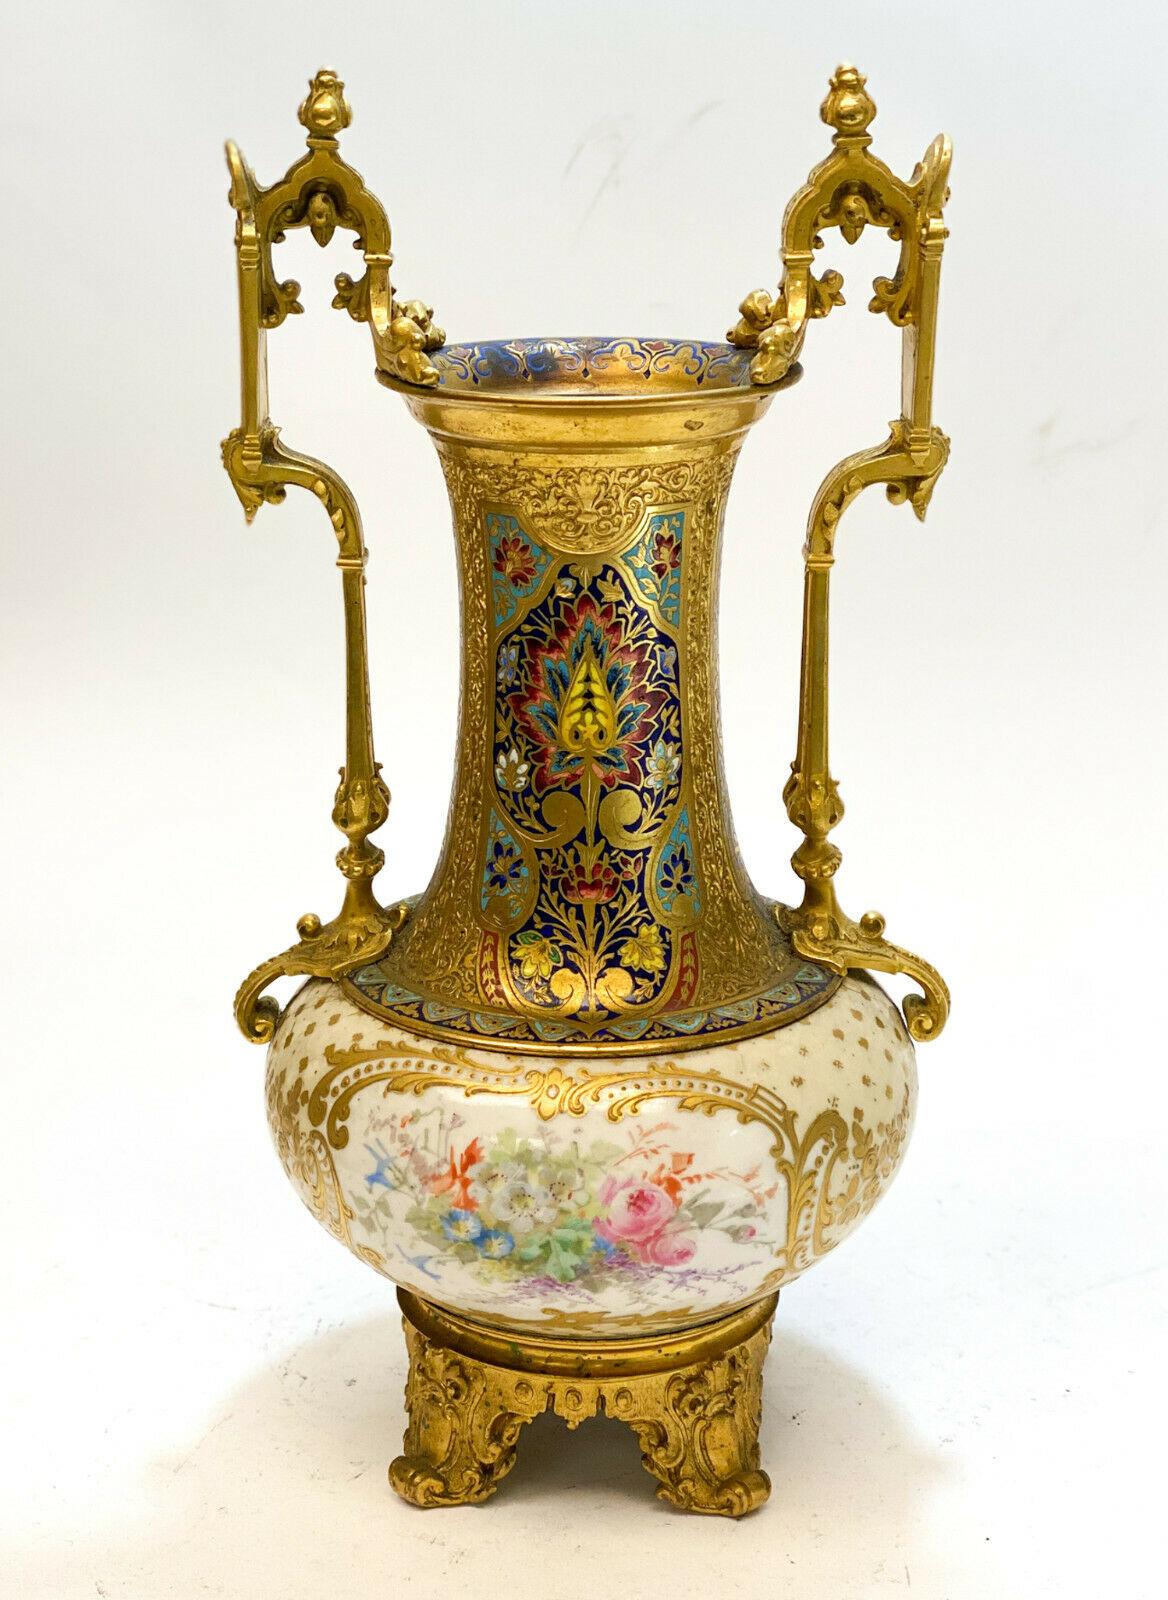 Sevres Porcelain Champleve Enamel Gilt Bronze Mounted Twin Handled Vase In Good Condition For Sale In Pasadena, CA